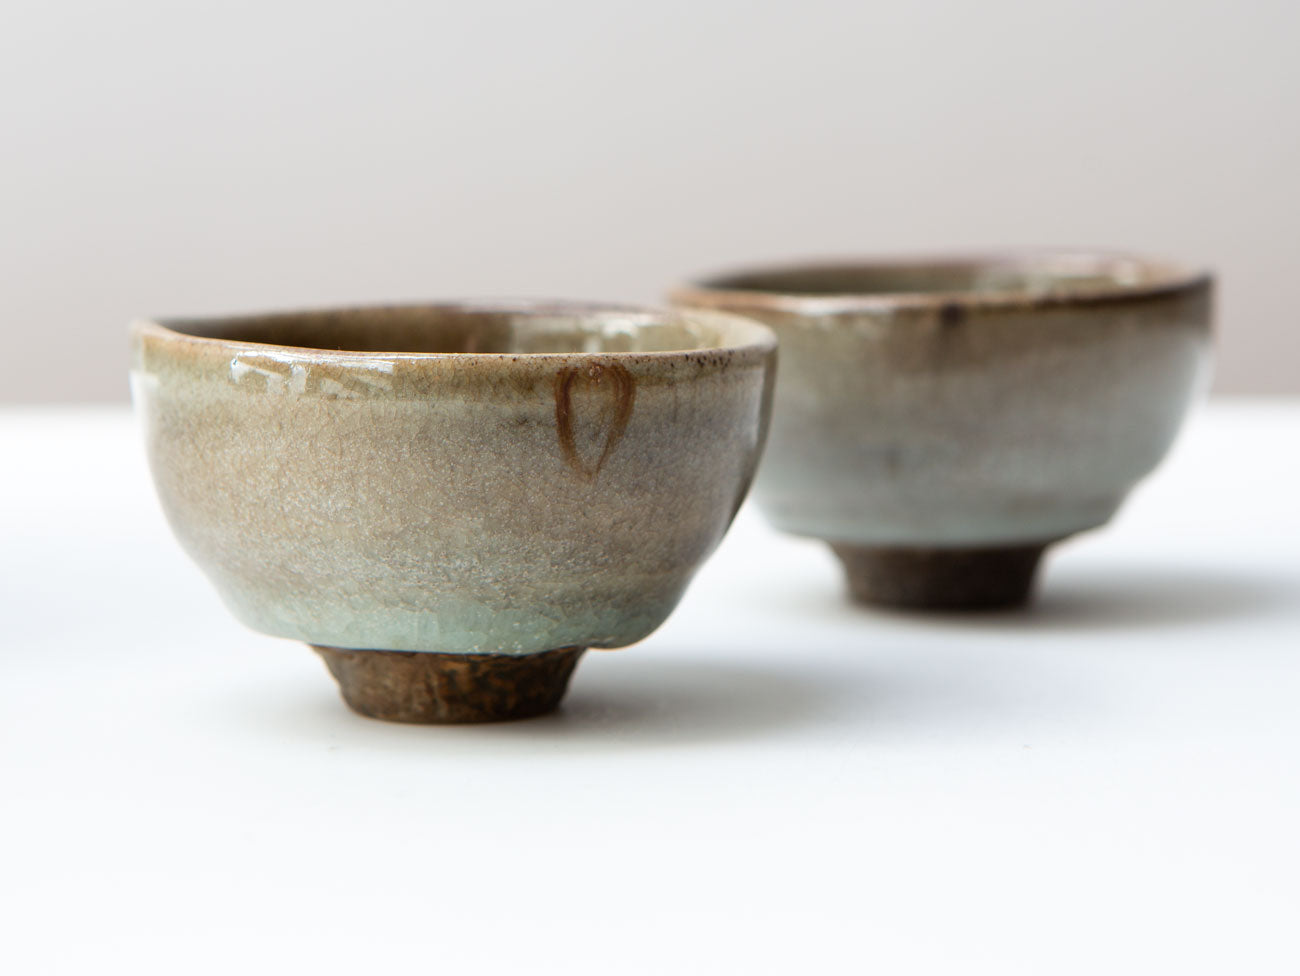 A Pair of Red & Blue Cups, wood-fired. Liao Guo Hua.